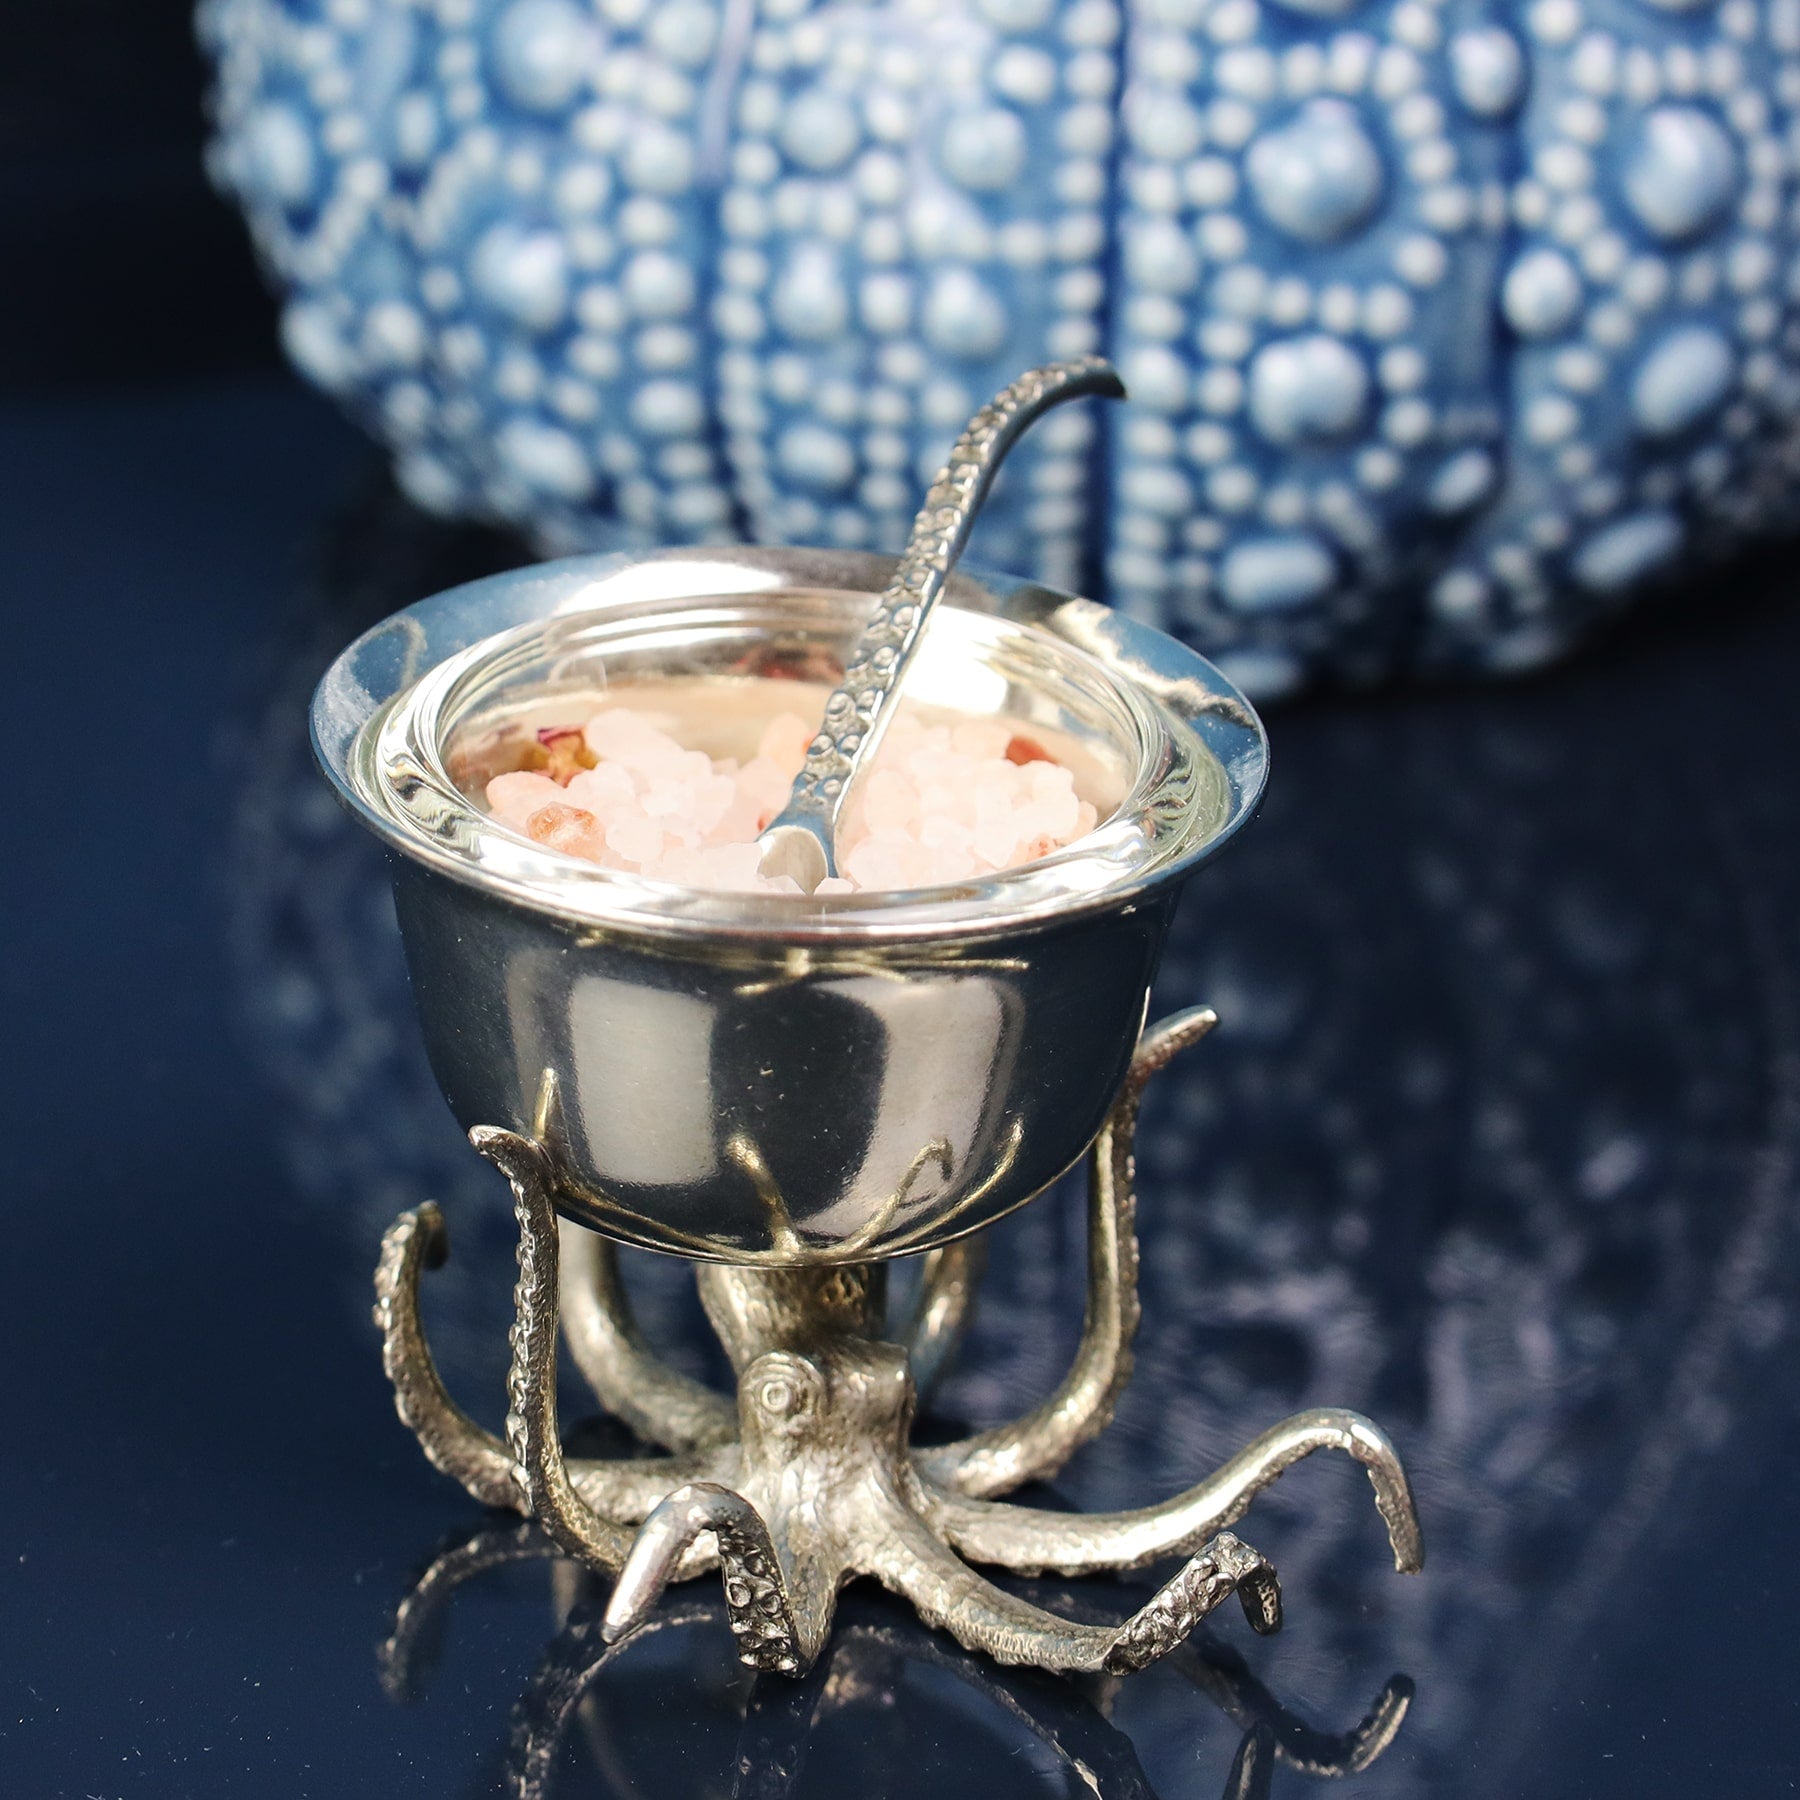 Pewter Octopus Condiment Bowl with the spoon containing salt,sits on a table with other pewter items and a jug in the background